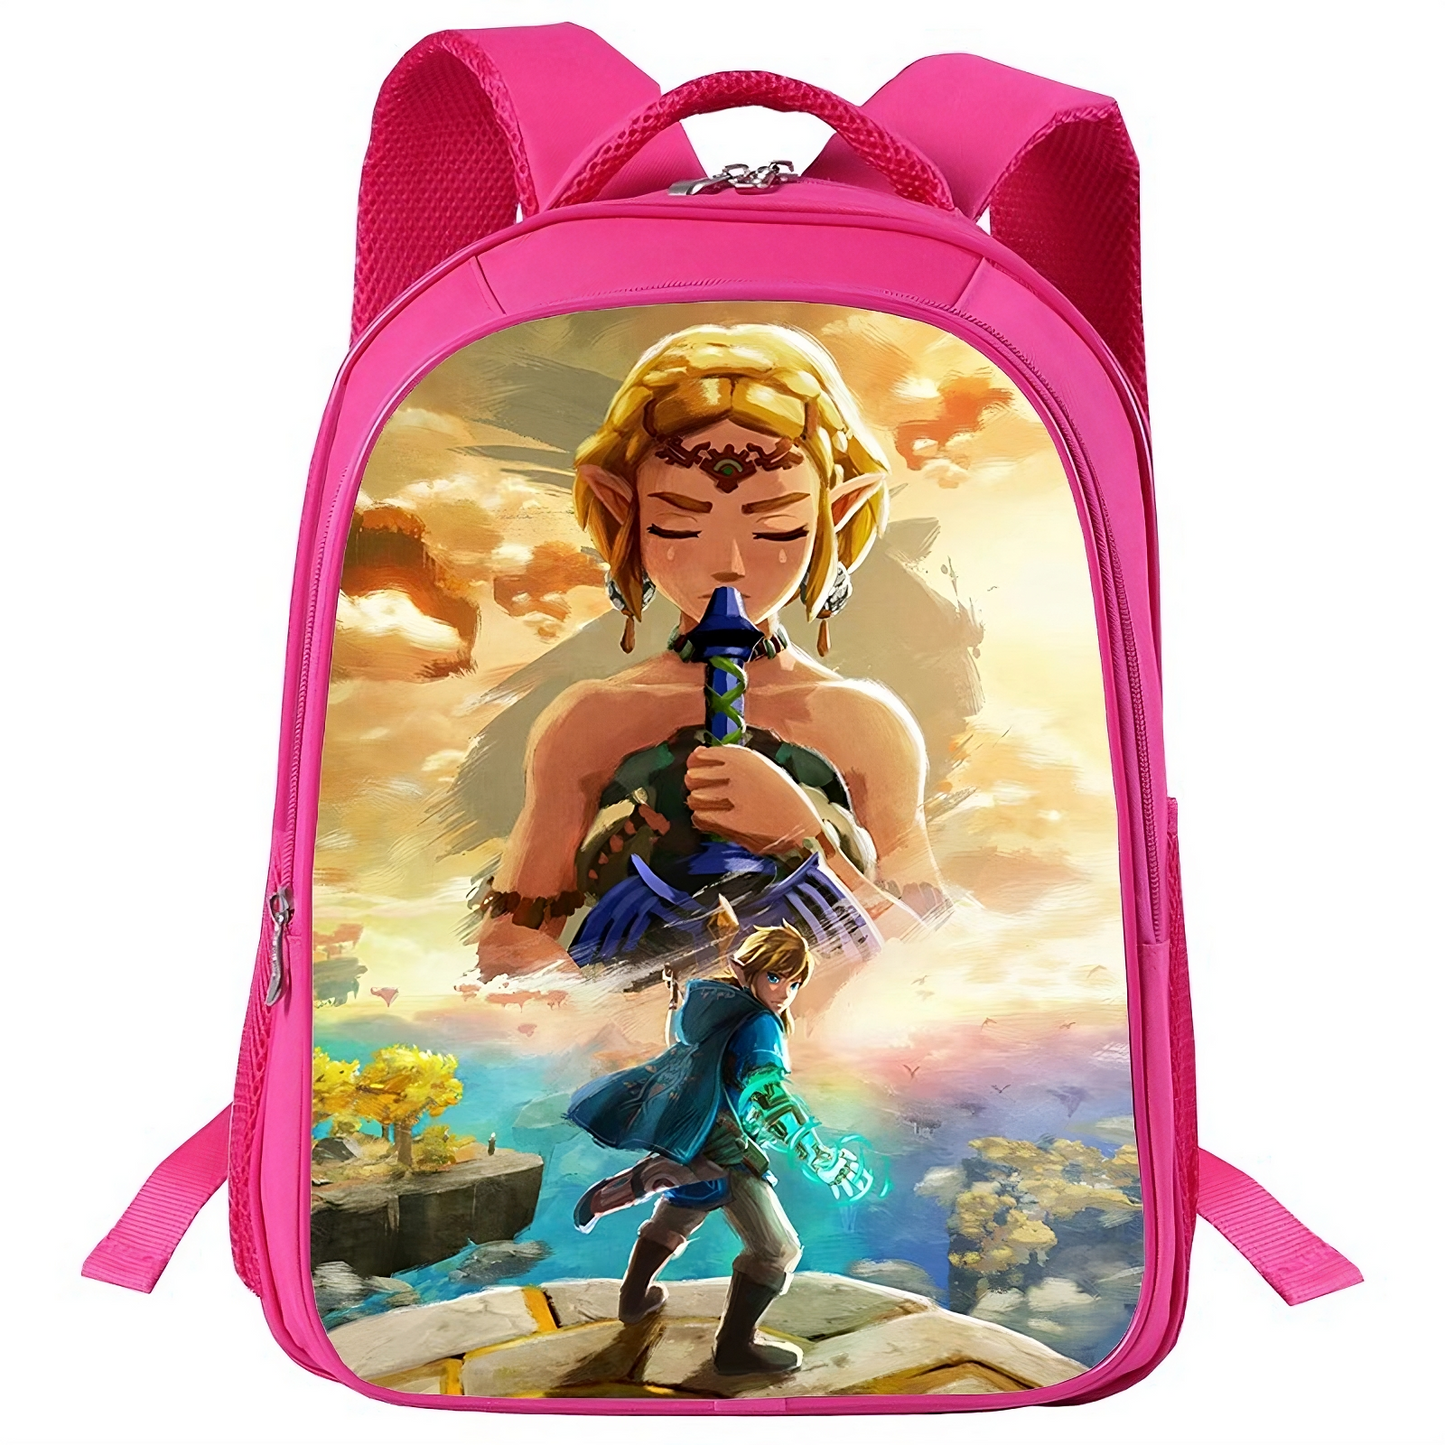 Princess zelda and link Backpack with Lunch Bag and Pencil Case